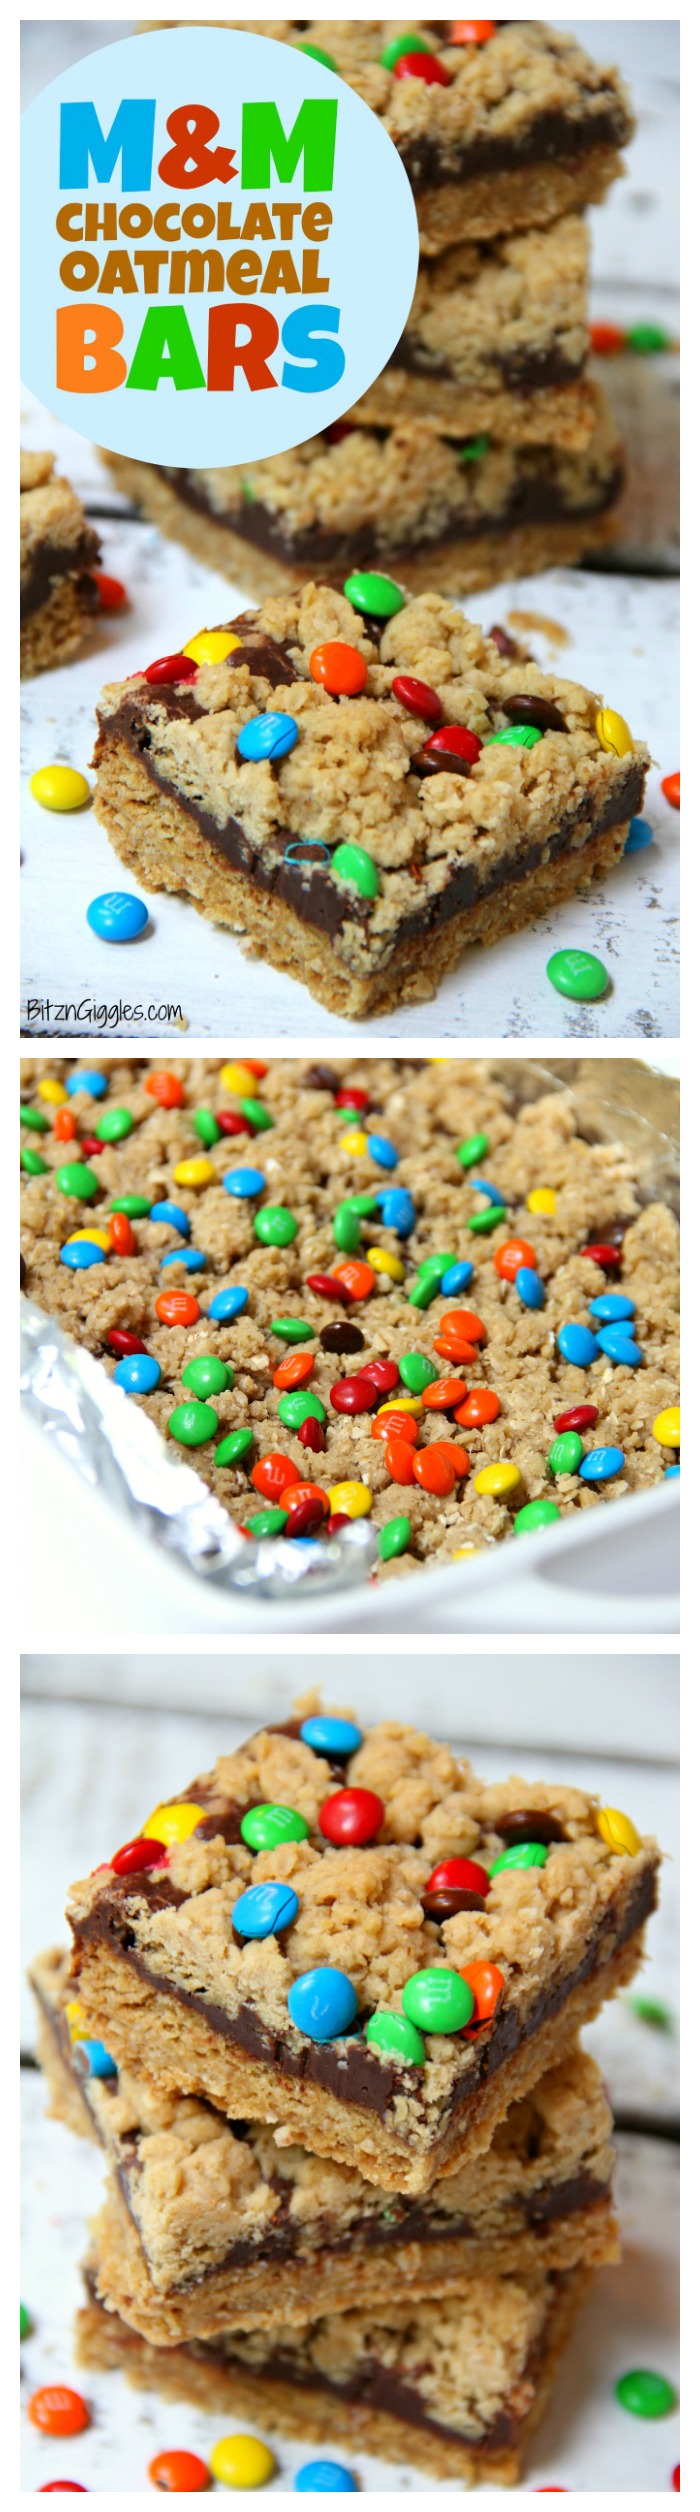 M&M Chocolate Oatmeal Bars - Chewy oatmeal bars with a chocolaty fudge layer, sprinkled with M&Ms.